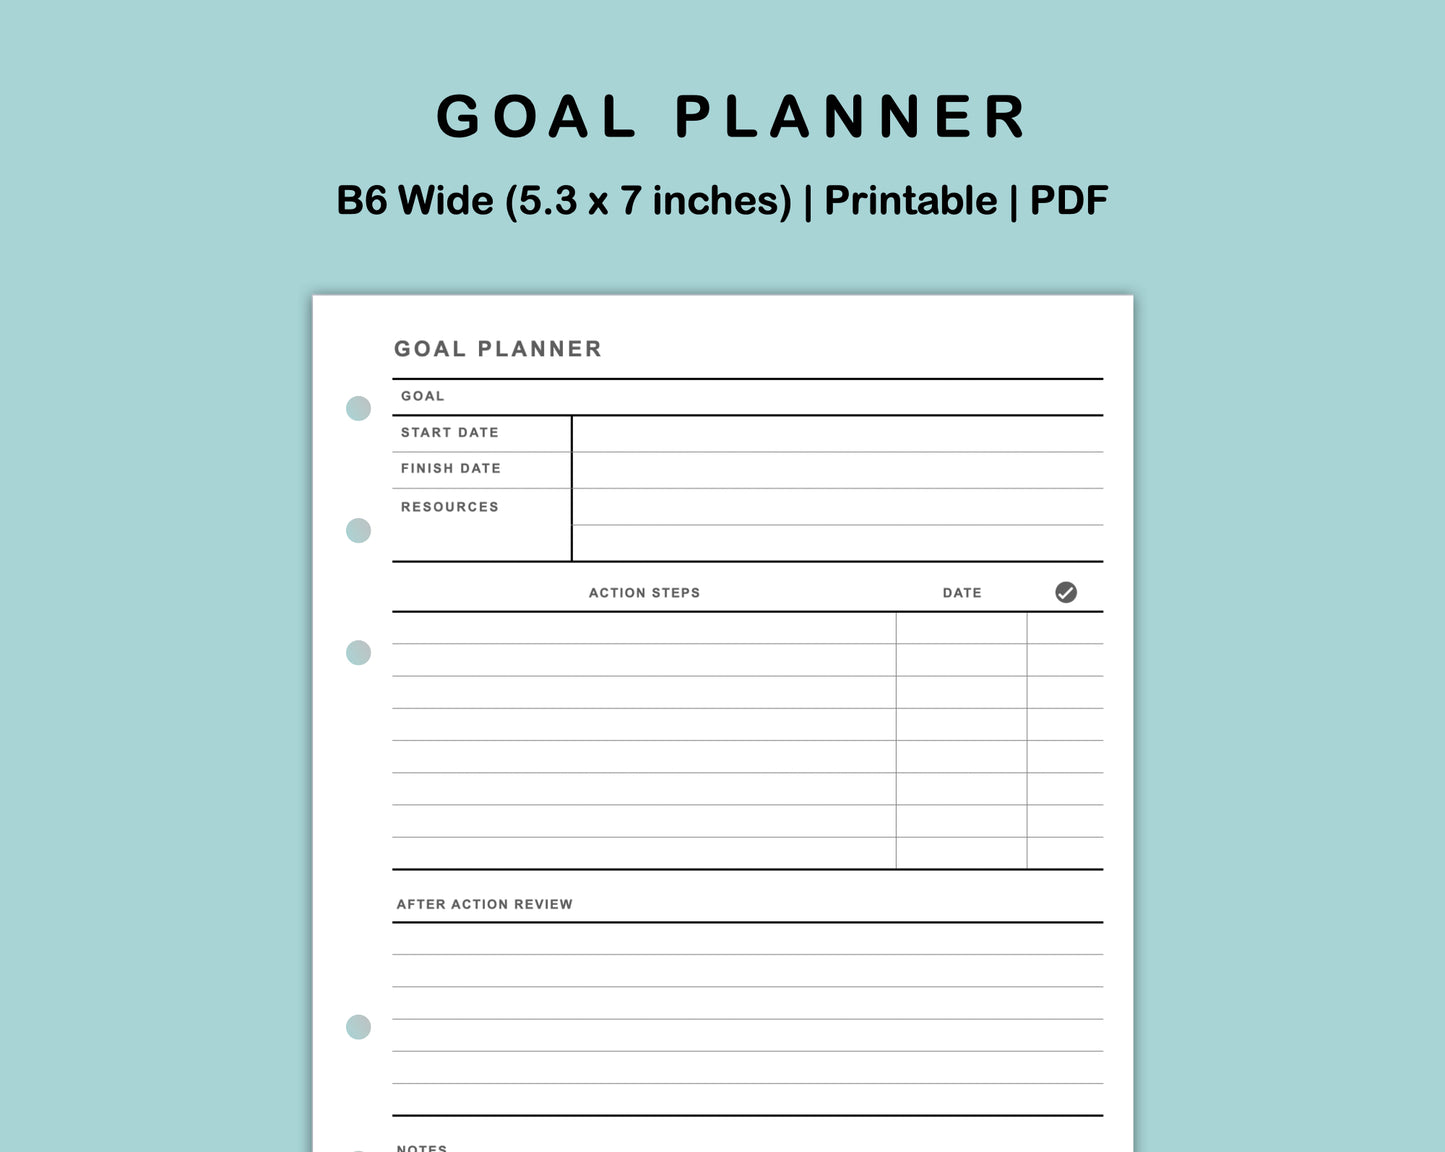 B6 Wide Inserts - Goal Planner